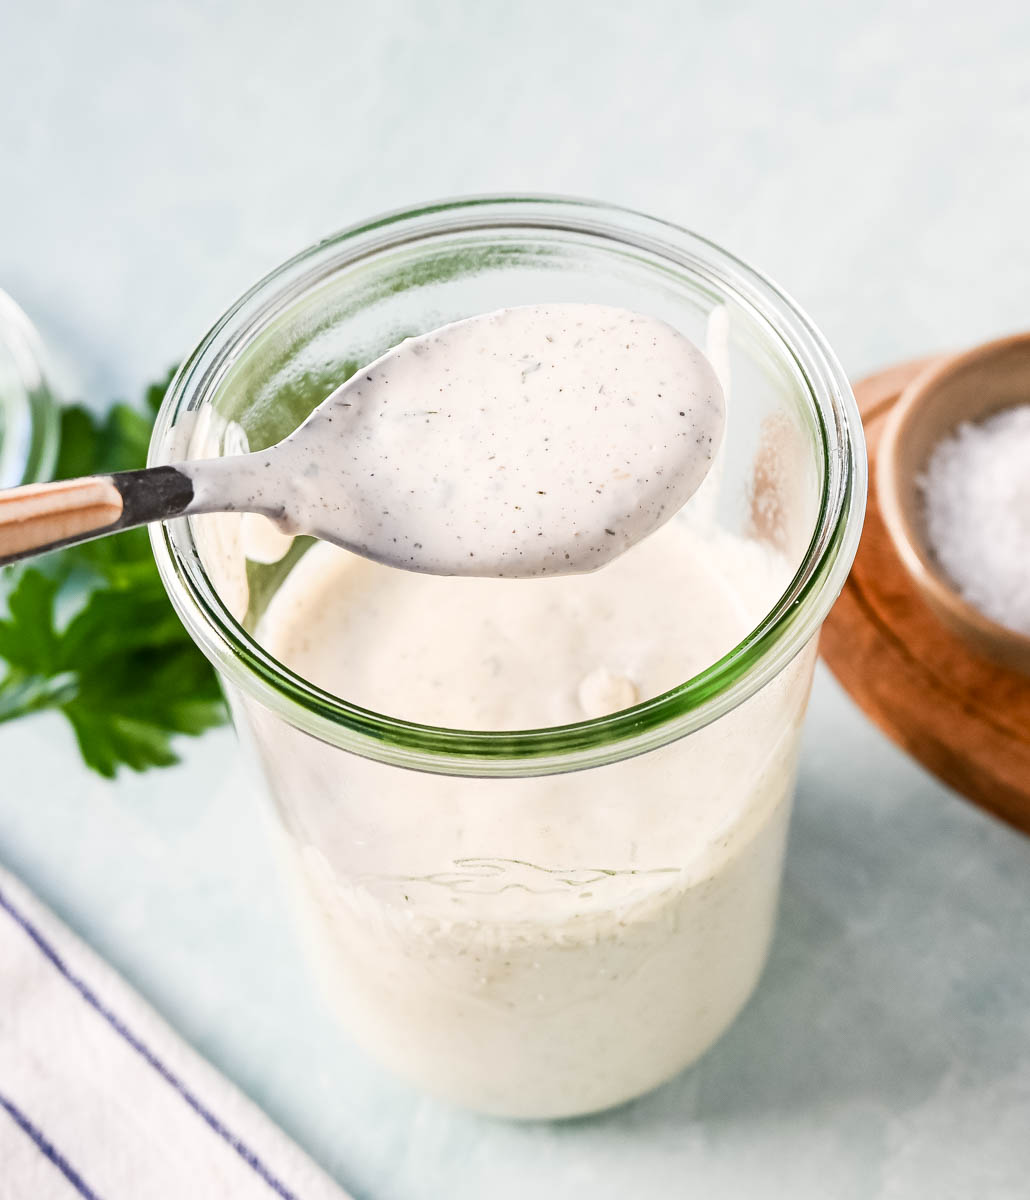 This creamy homemade ranch dressing is better than the bottled ranch dressing you find in the grocery store. This is made with fresh ingredients and vibrant herbs and is so easy to make. This is the best ranch dressing recipe!